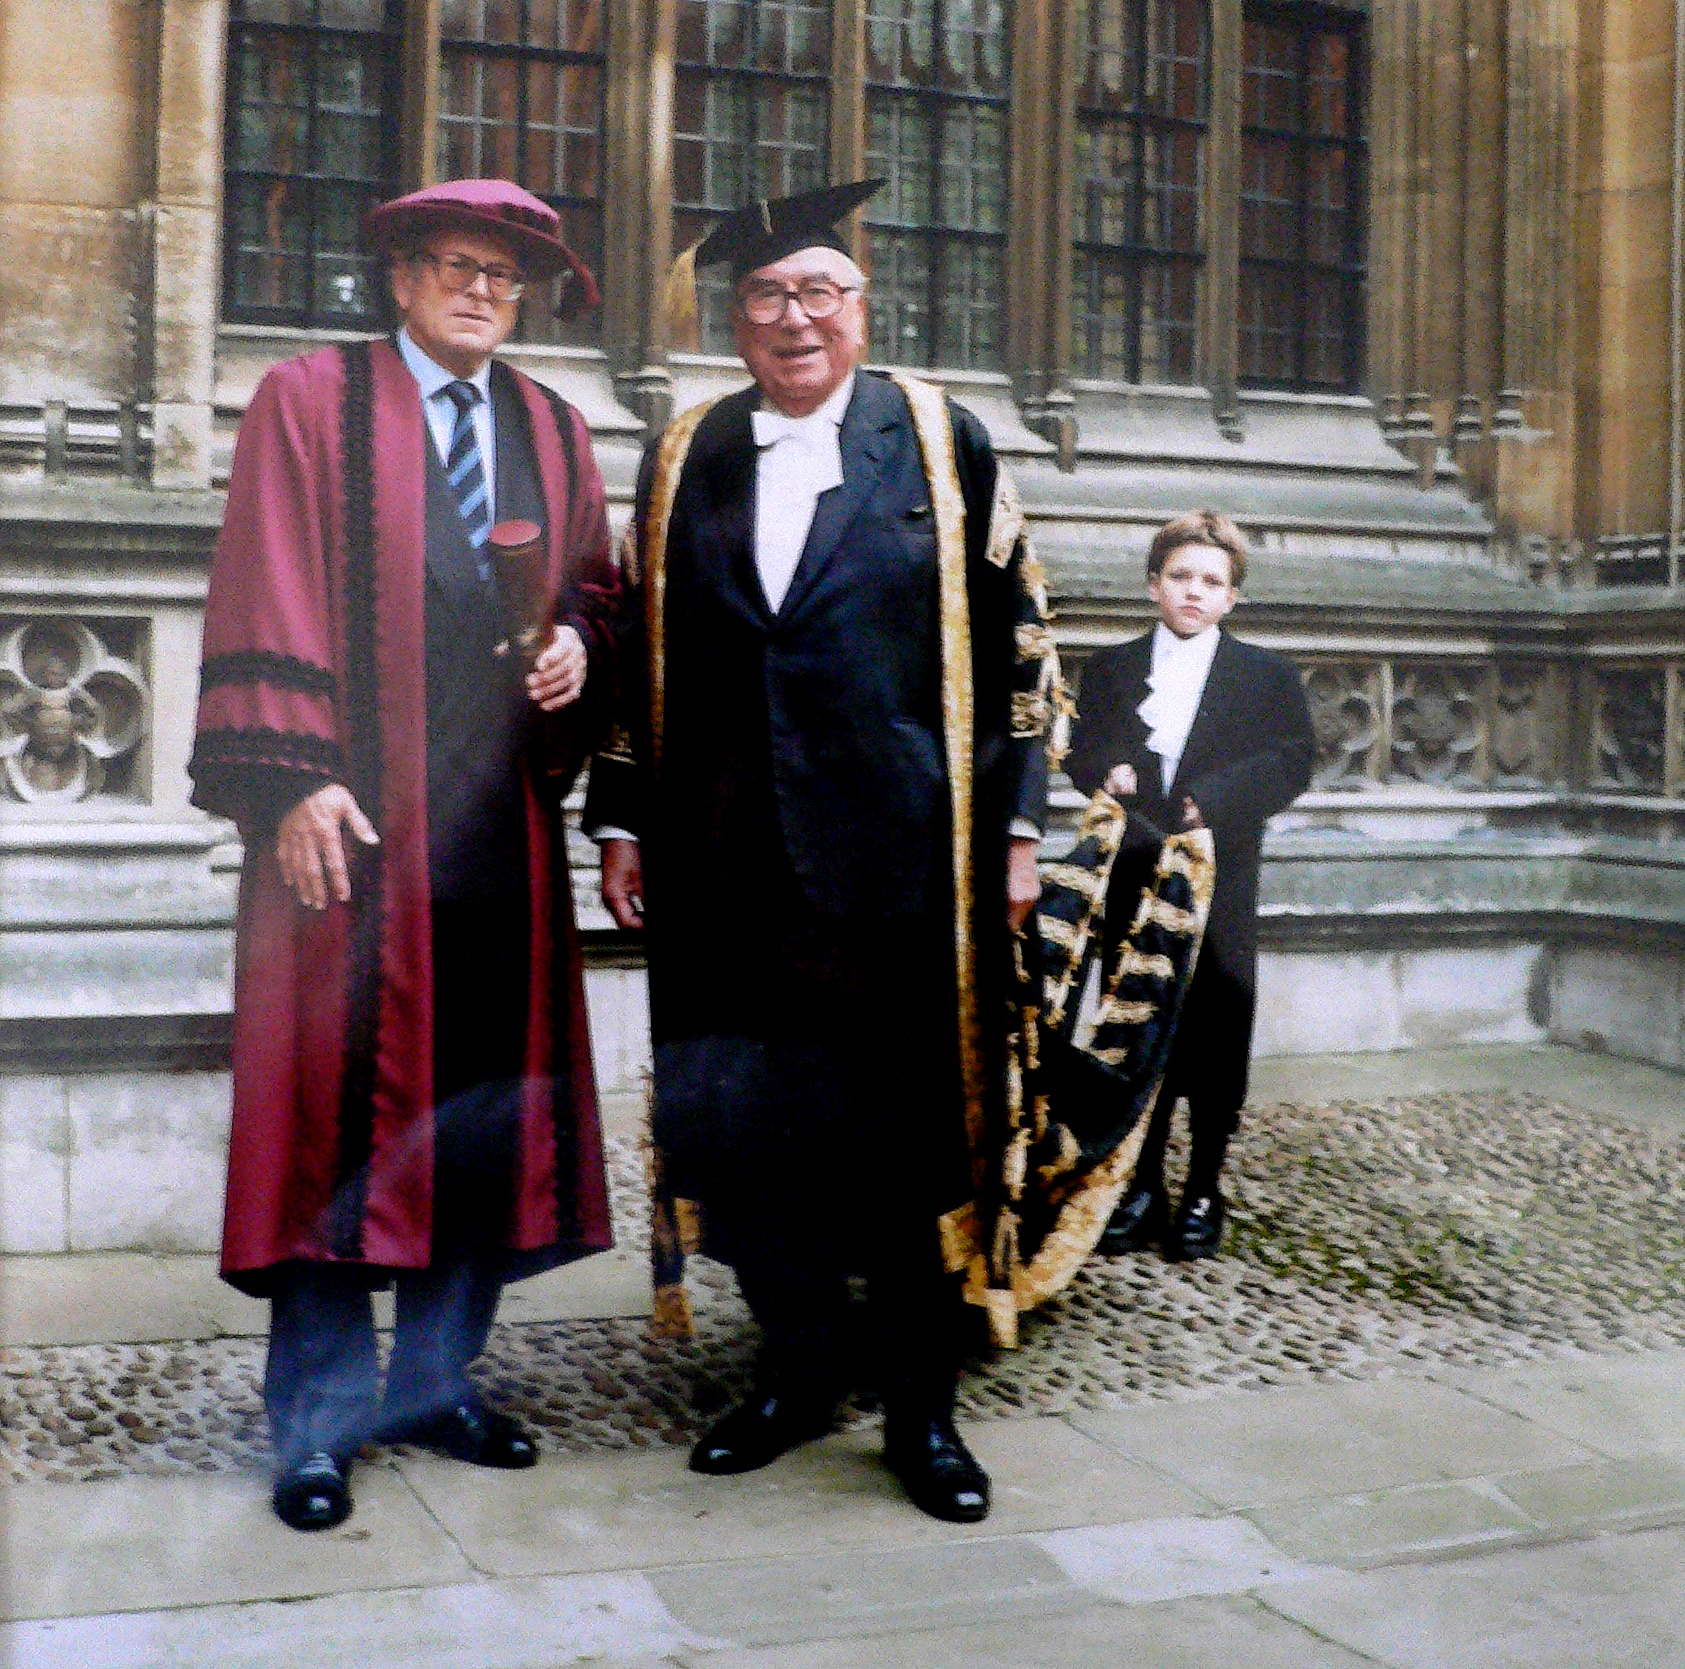 two men in gowns and one in a graduation cap are standing on a stone walkway in front of a large building